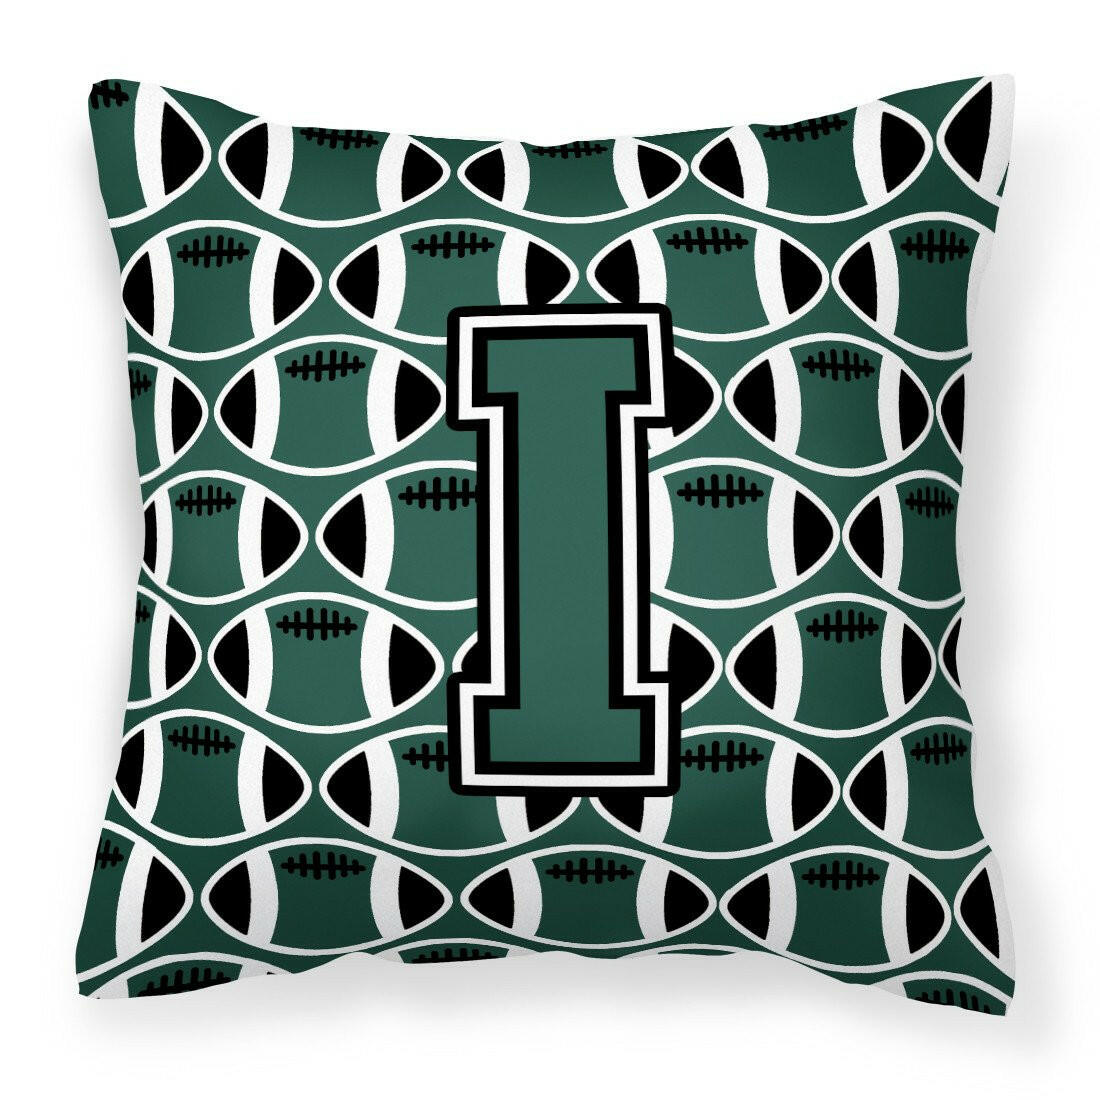 Letter I Football Green and White Fabric Decorative Pillow CJ1071-IPW1414 by Caroline's Treasures